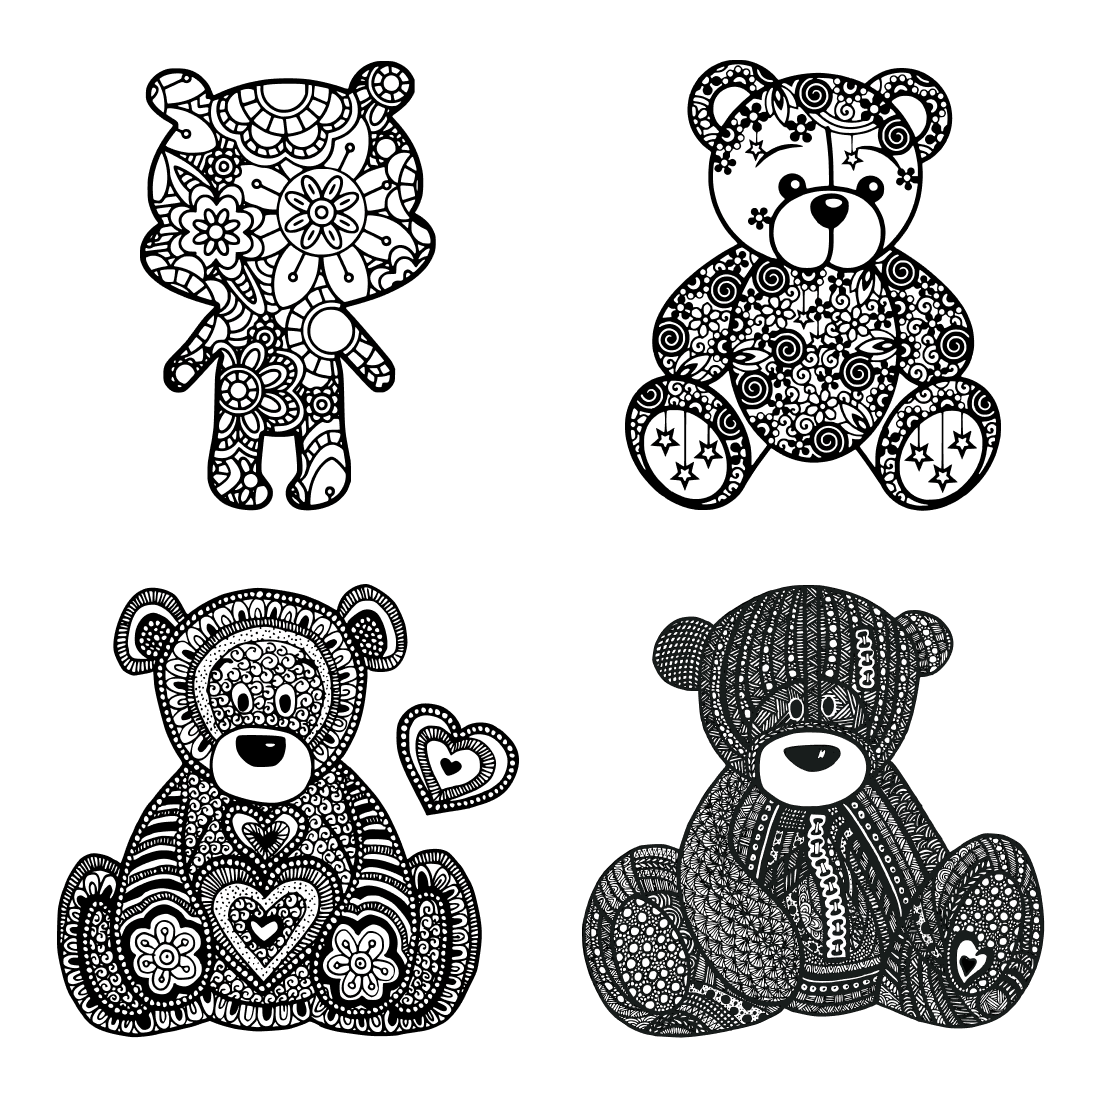 Four teddy bears with different patterns on them.